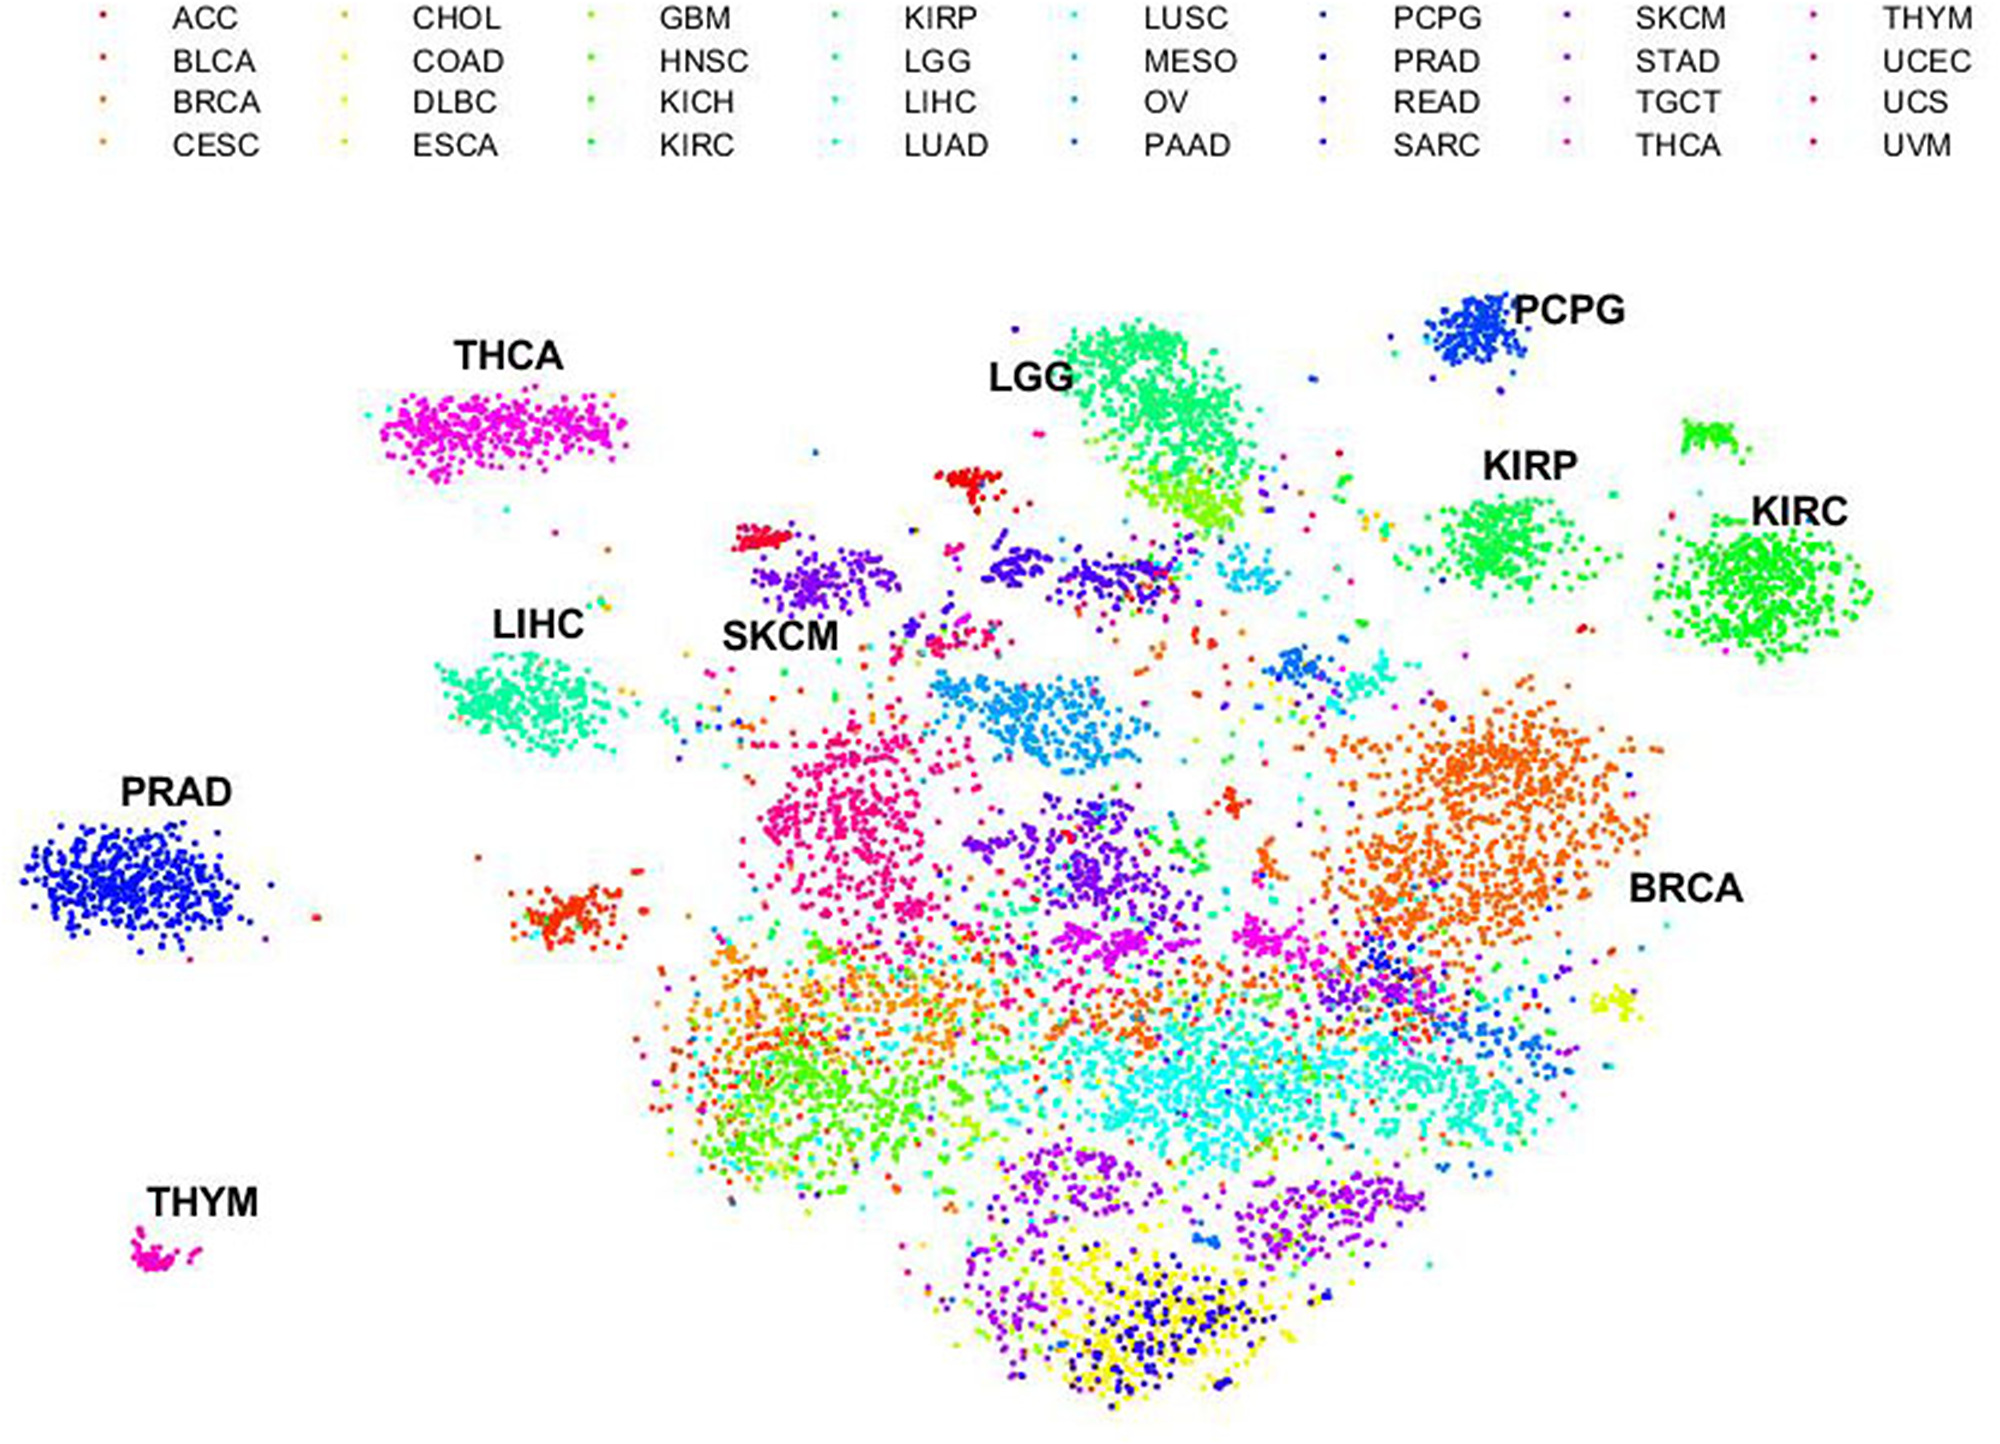 Dissimilarity of immune gene expression profiling across human cancers.